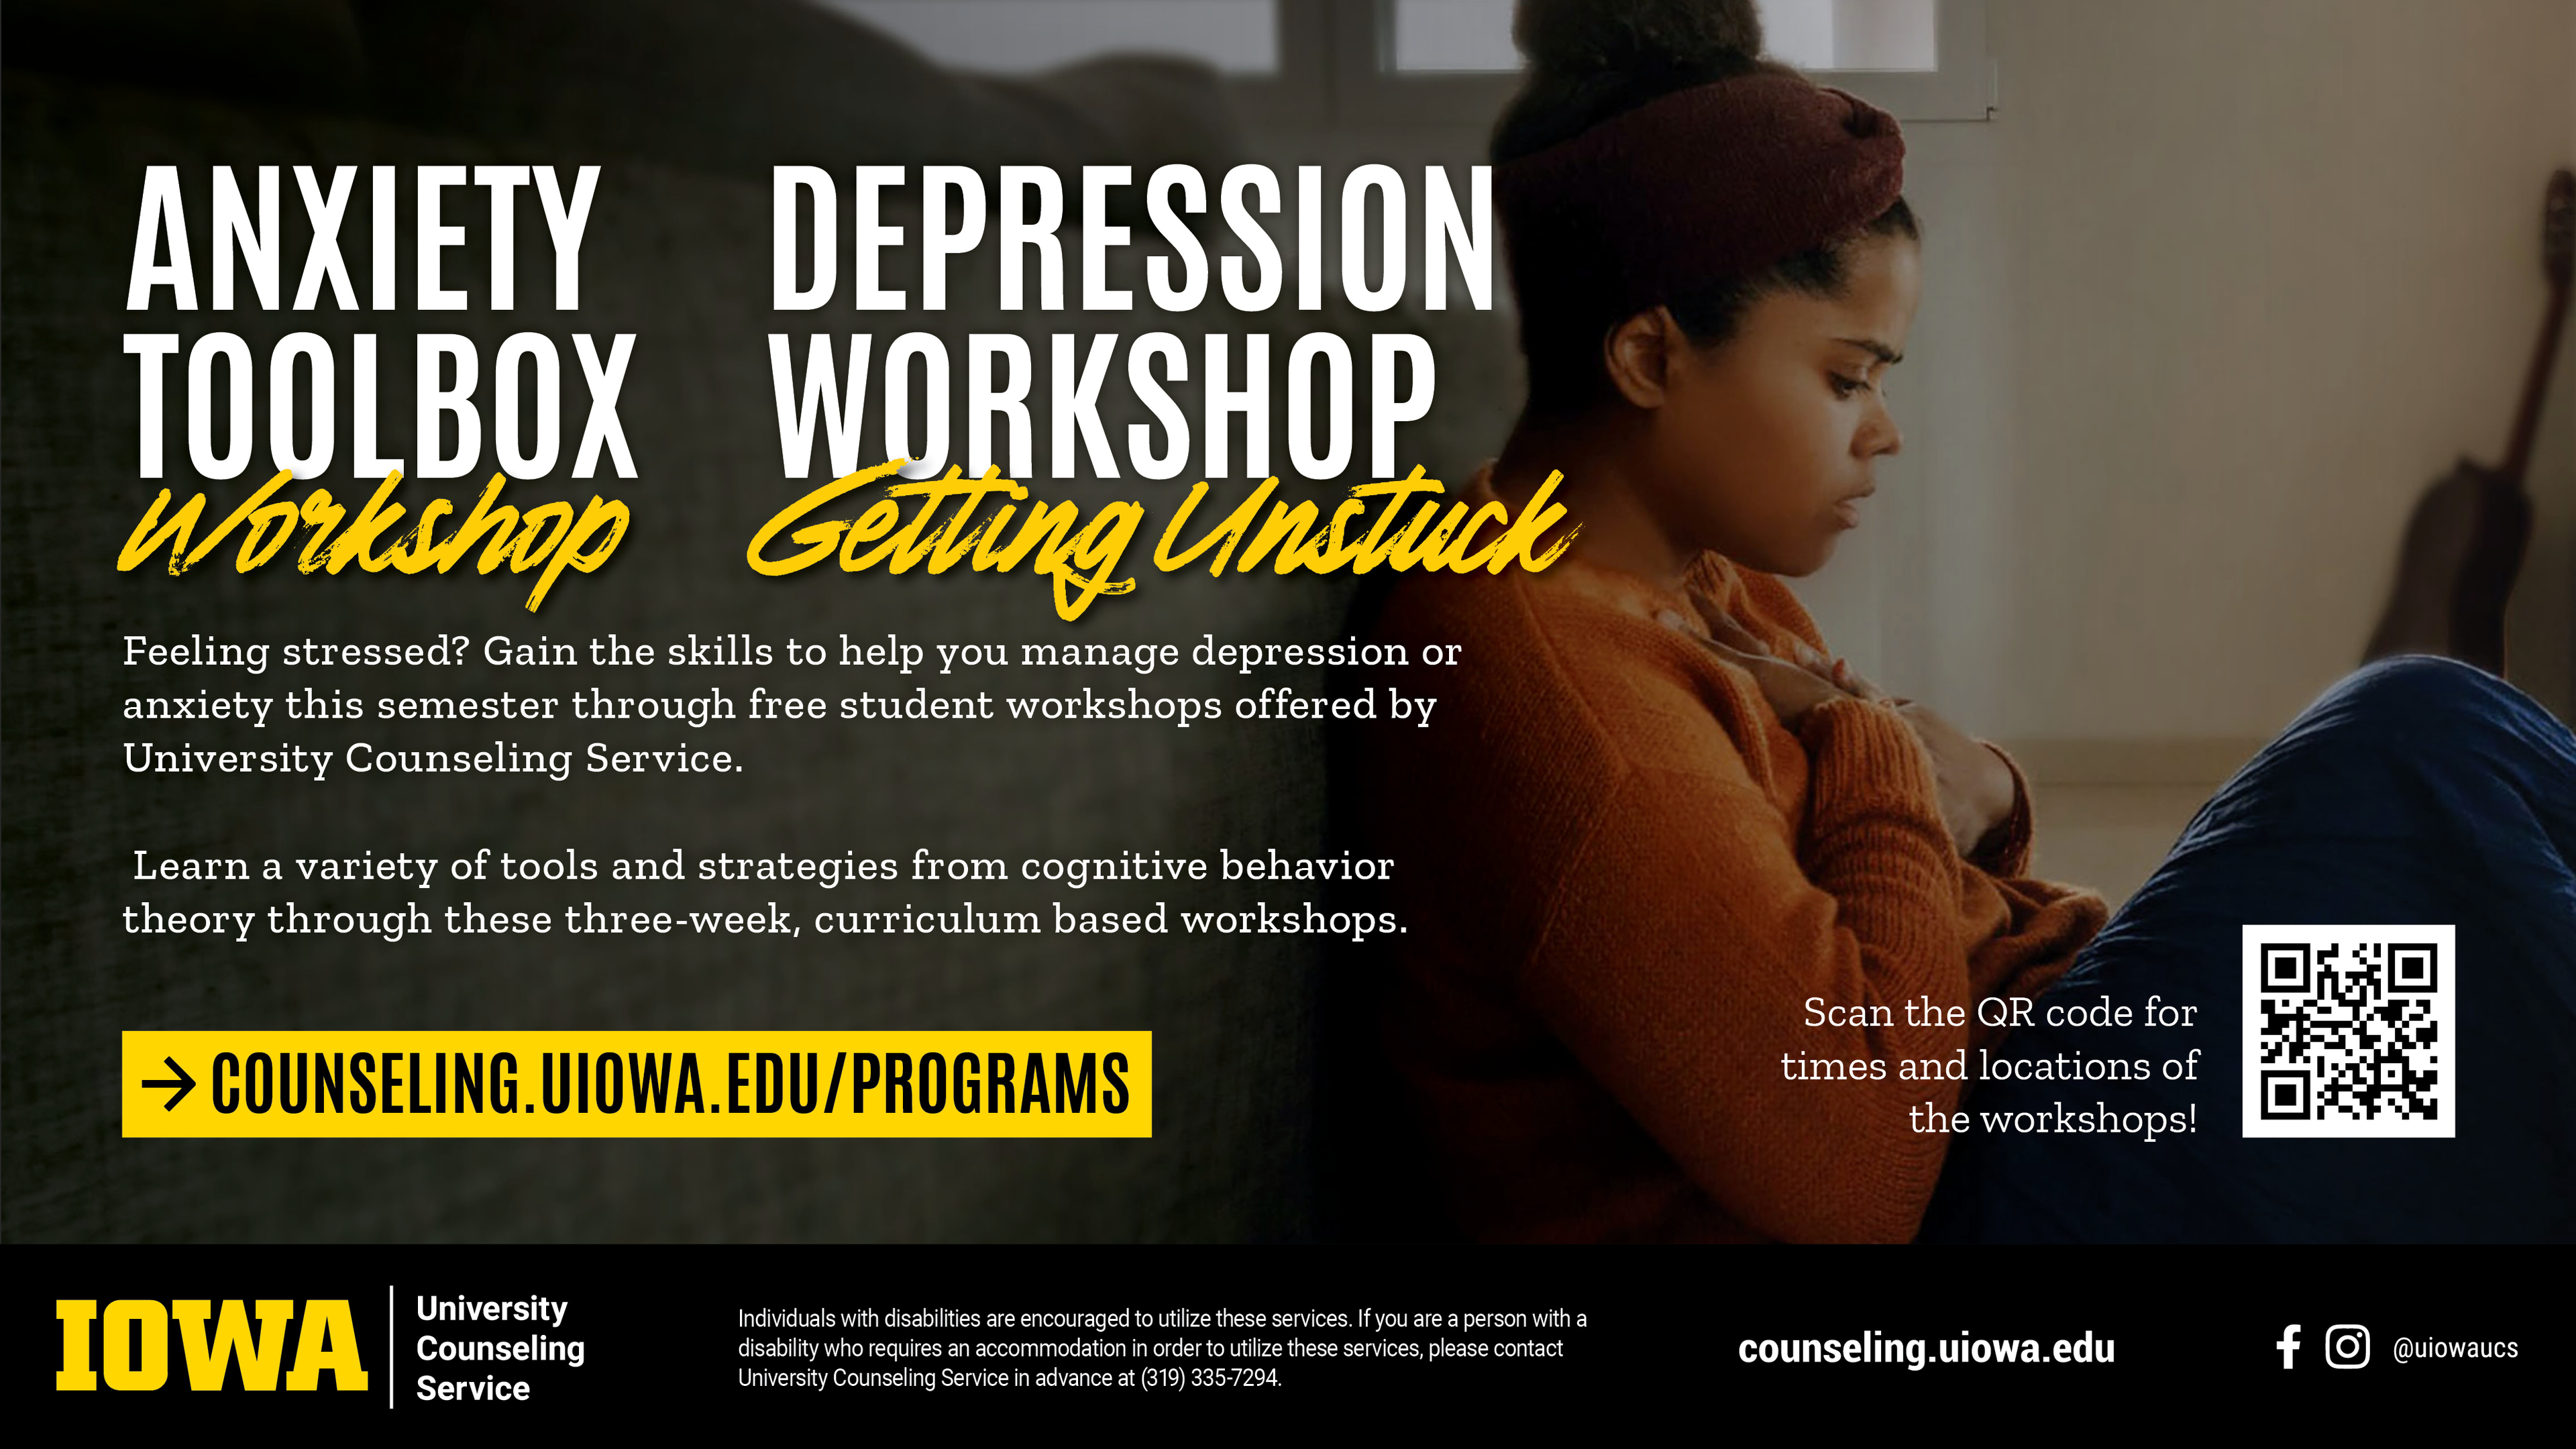 Anxiety toolbox and depression workshop